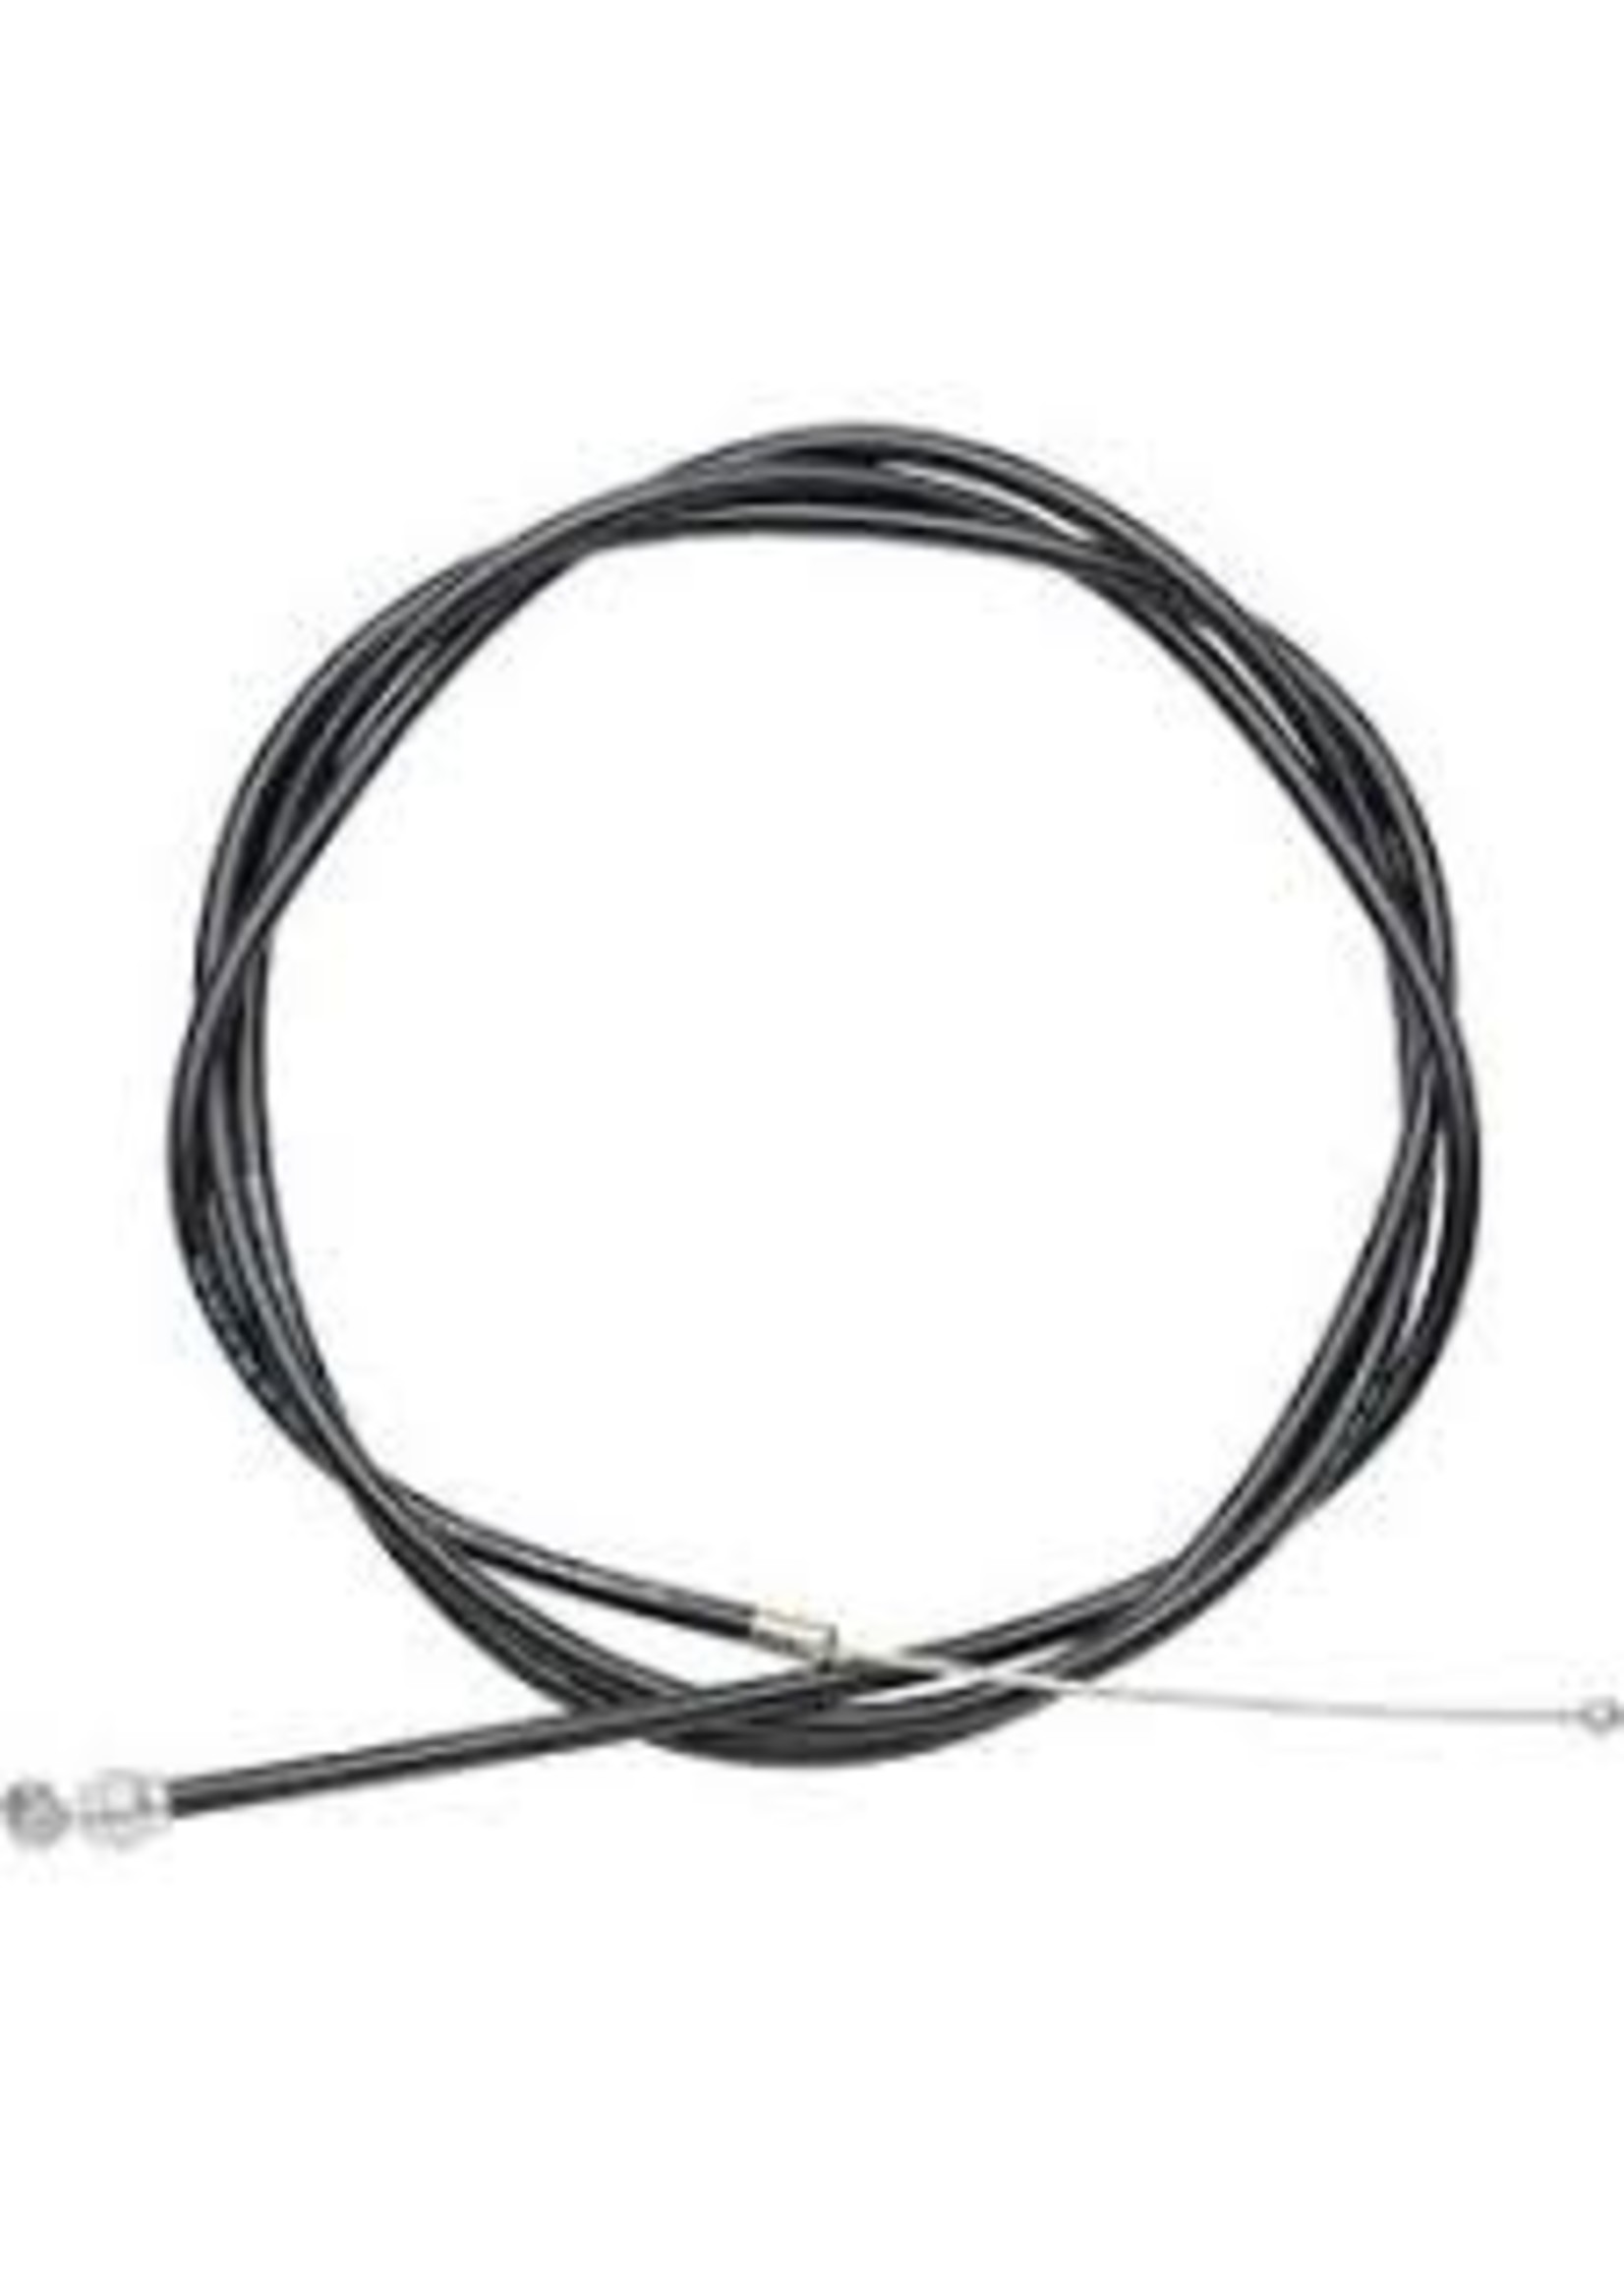 JAGWIRE JAG UNIVER SHIFTER CABLE W/CASING